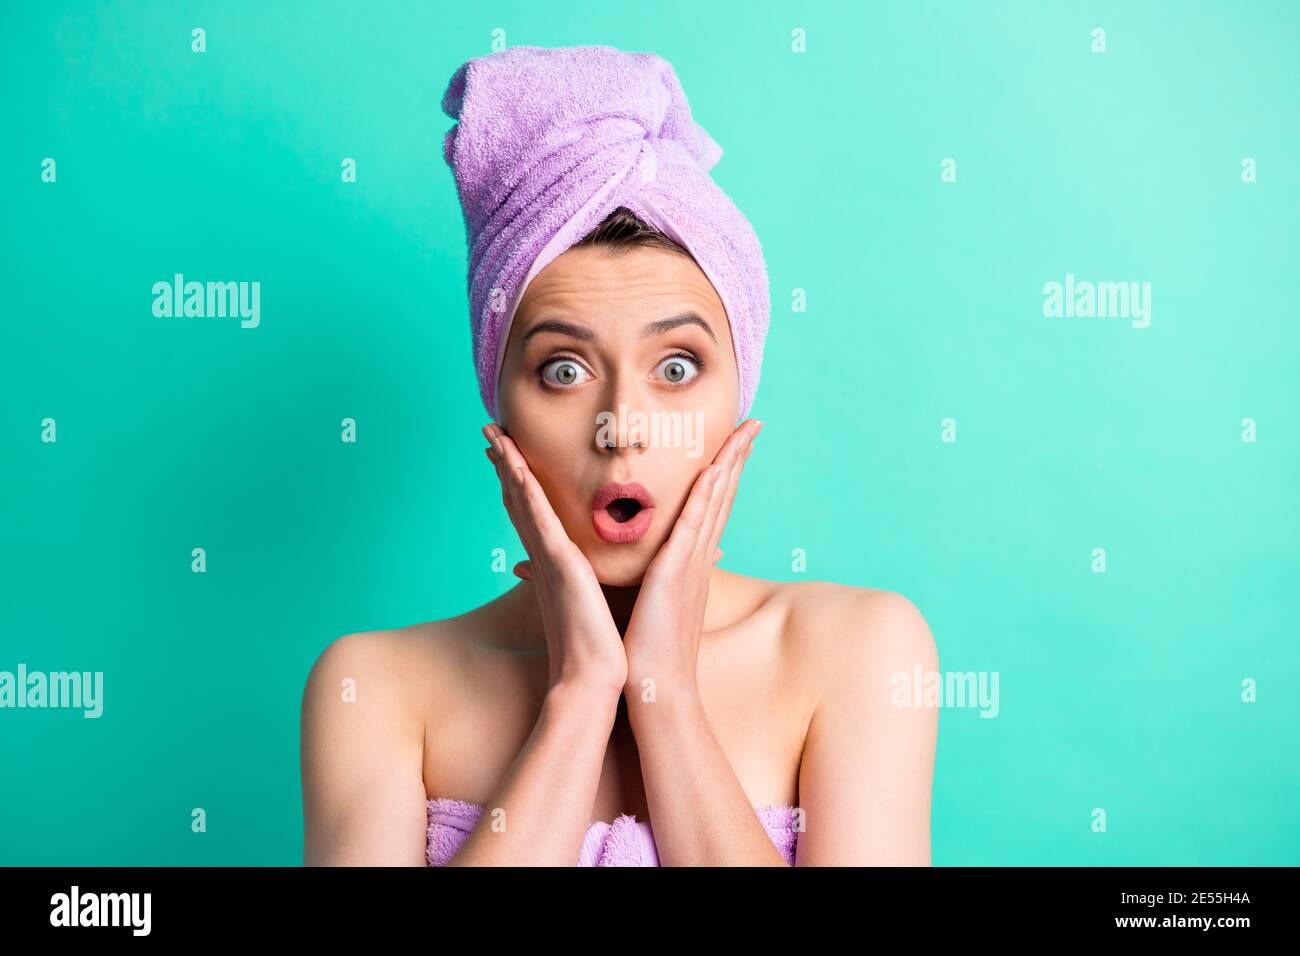 Photo portrait shocked woman turban on head doing hygiene procedures touching cheekbones isolated vivid teal color background Stock Photo